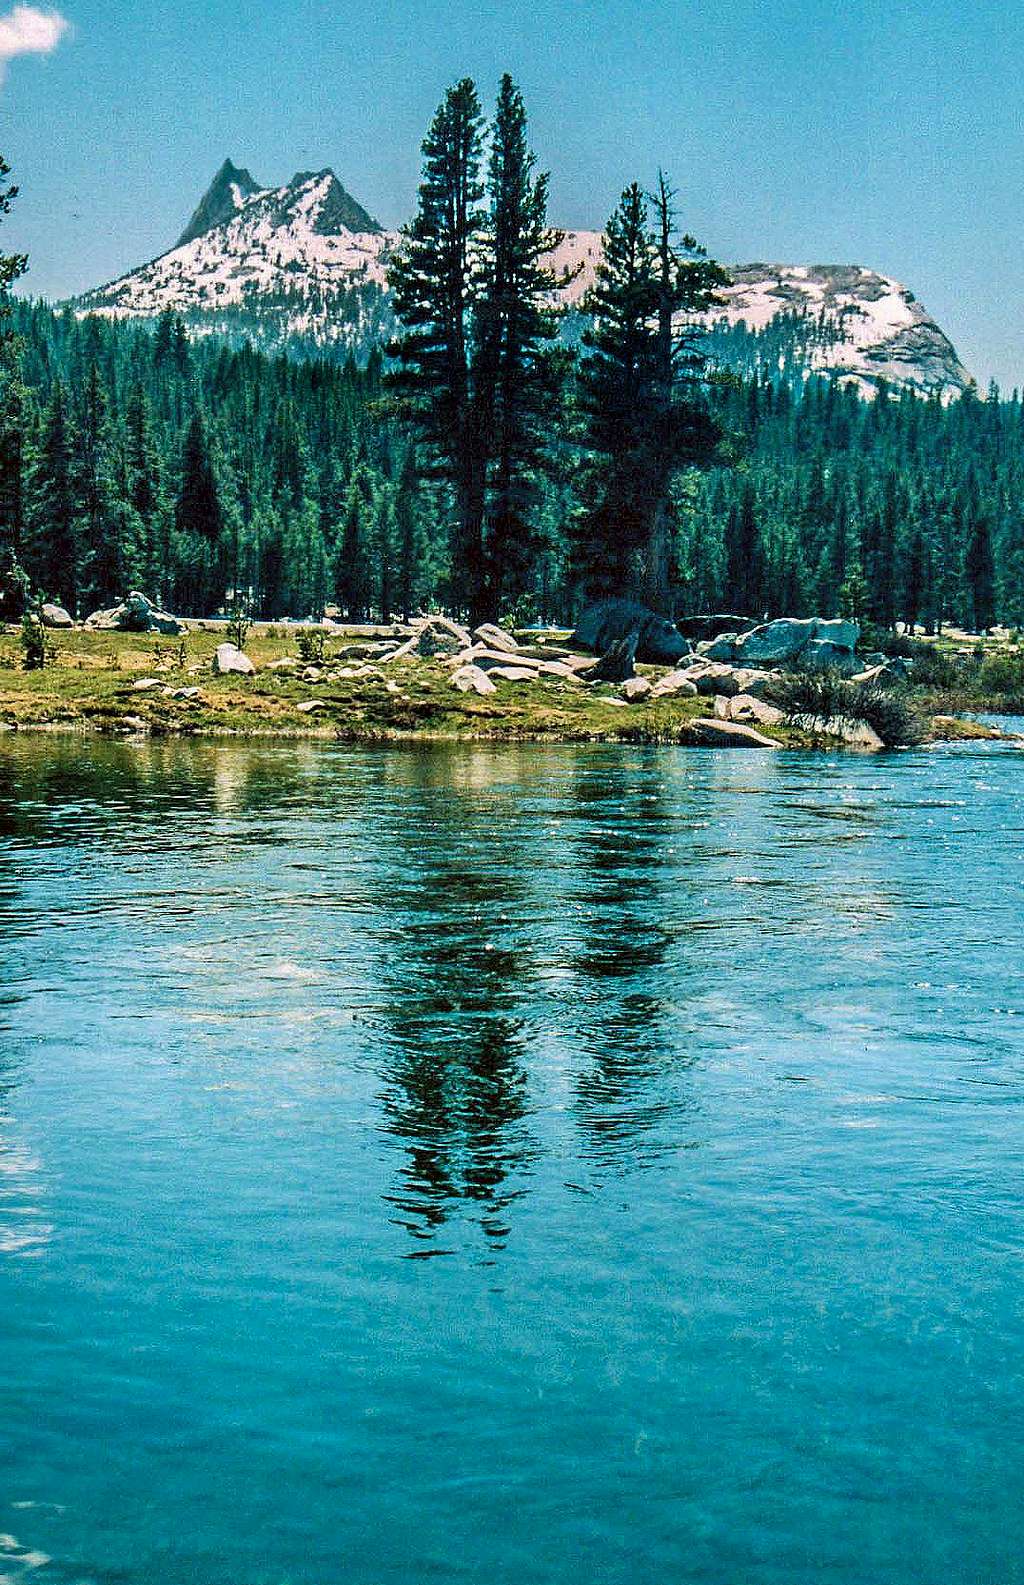 Cathedral Peak from the Tuolumne River